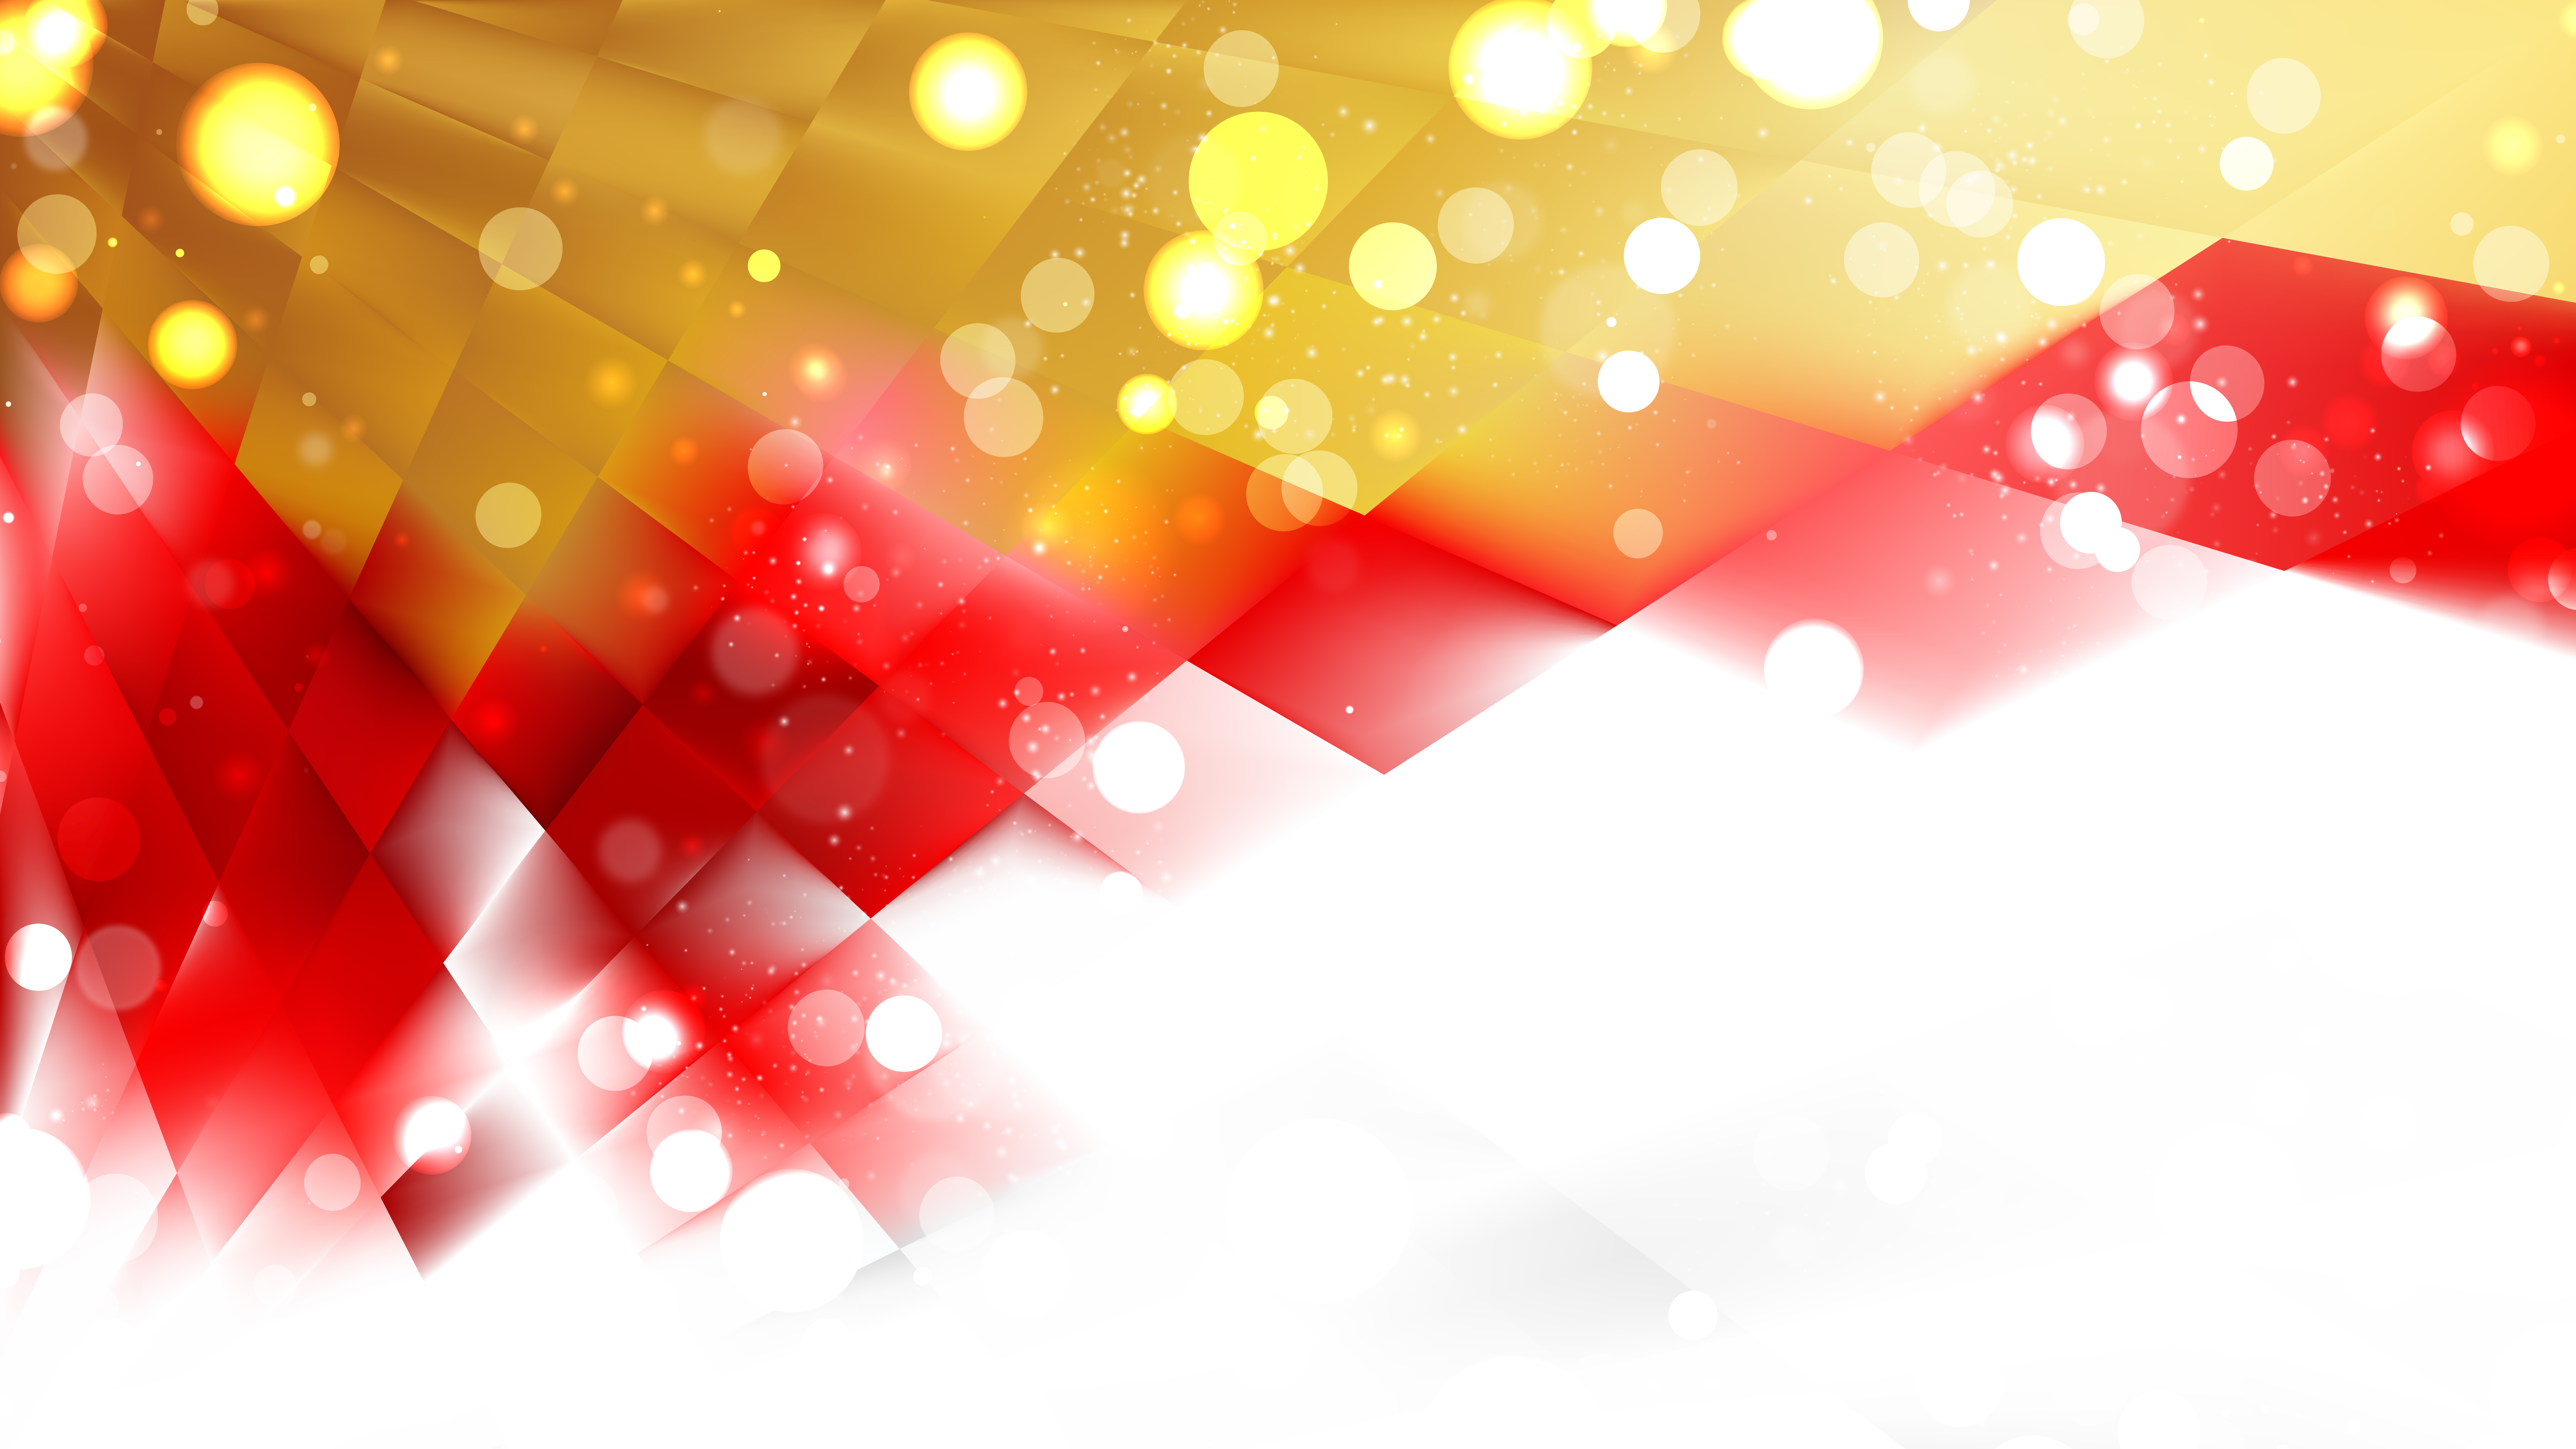 red and gold background images